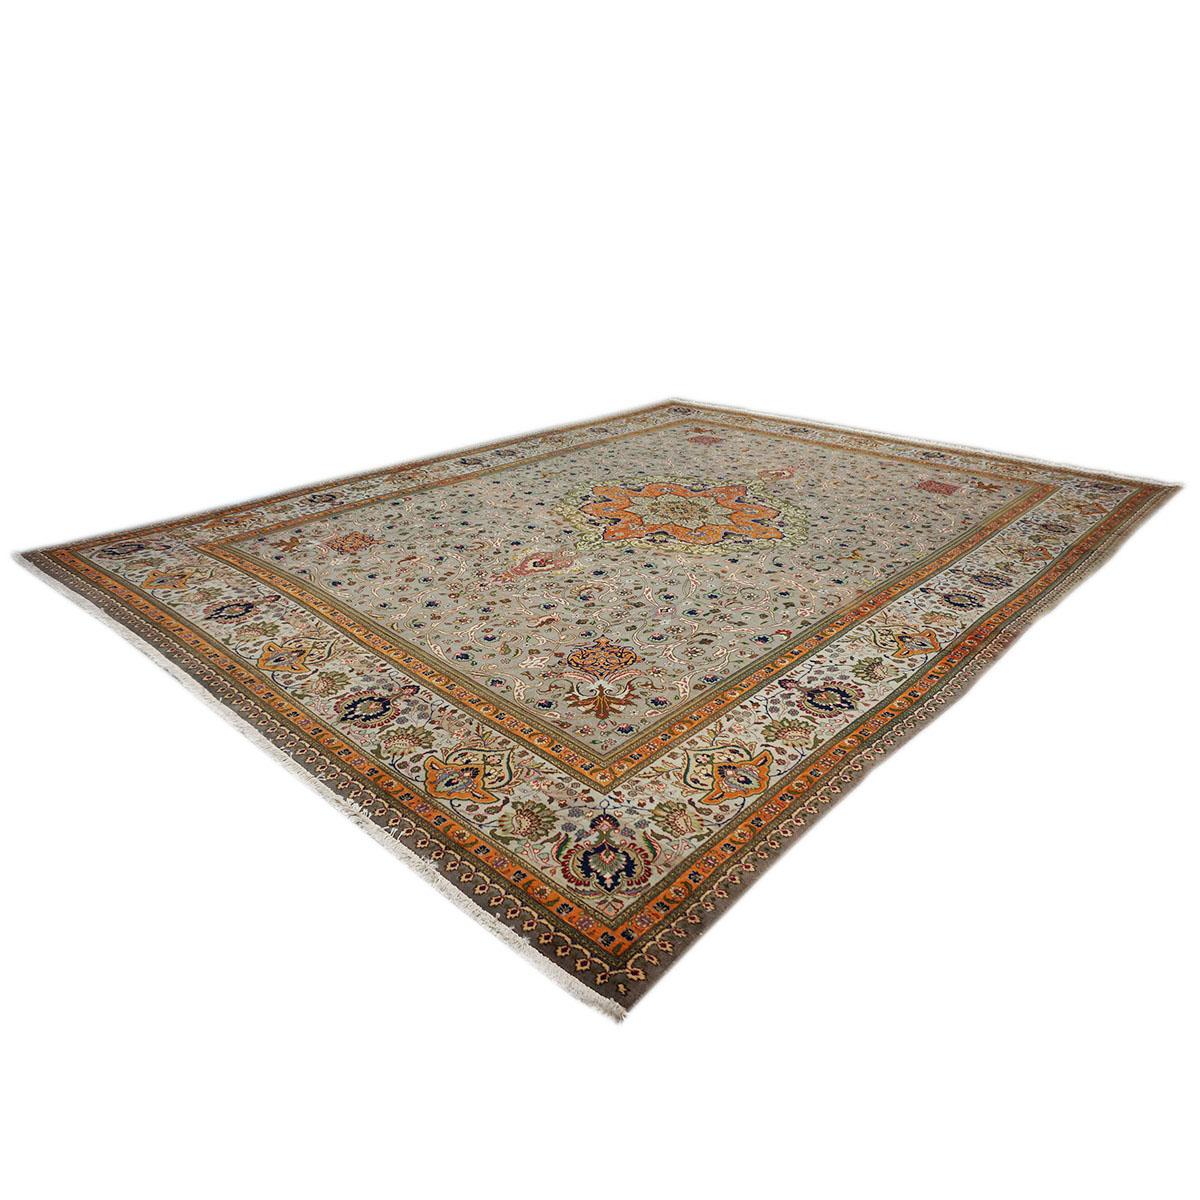 Mid-20th Century 20th Century Persian Wool Tabriz 10x13 Rug Grey and Light Blue Border For Sale